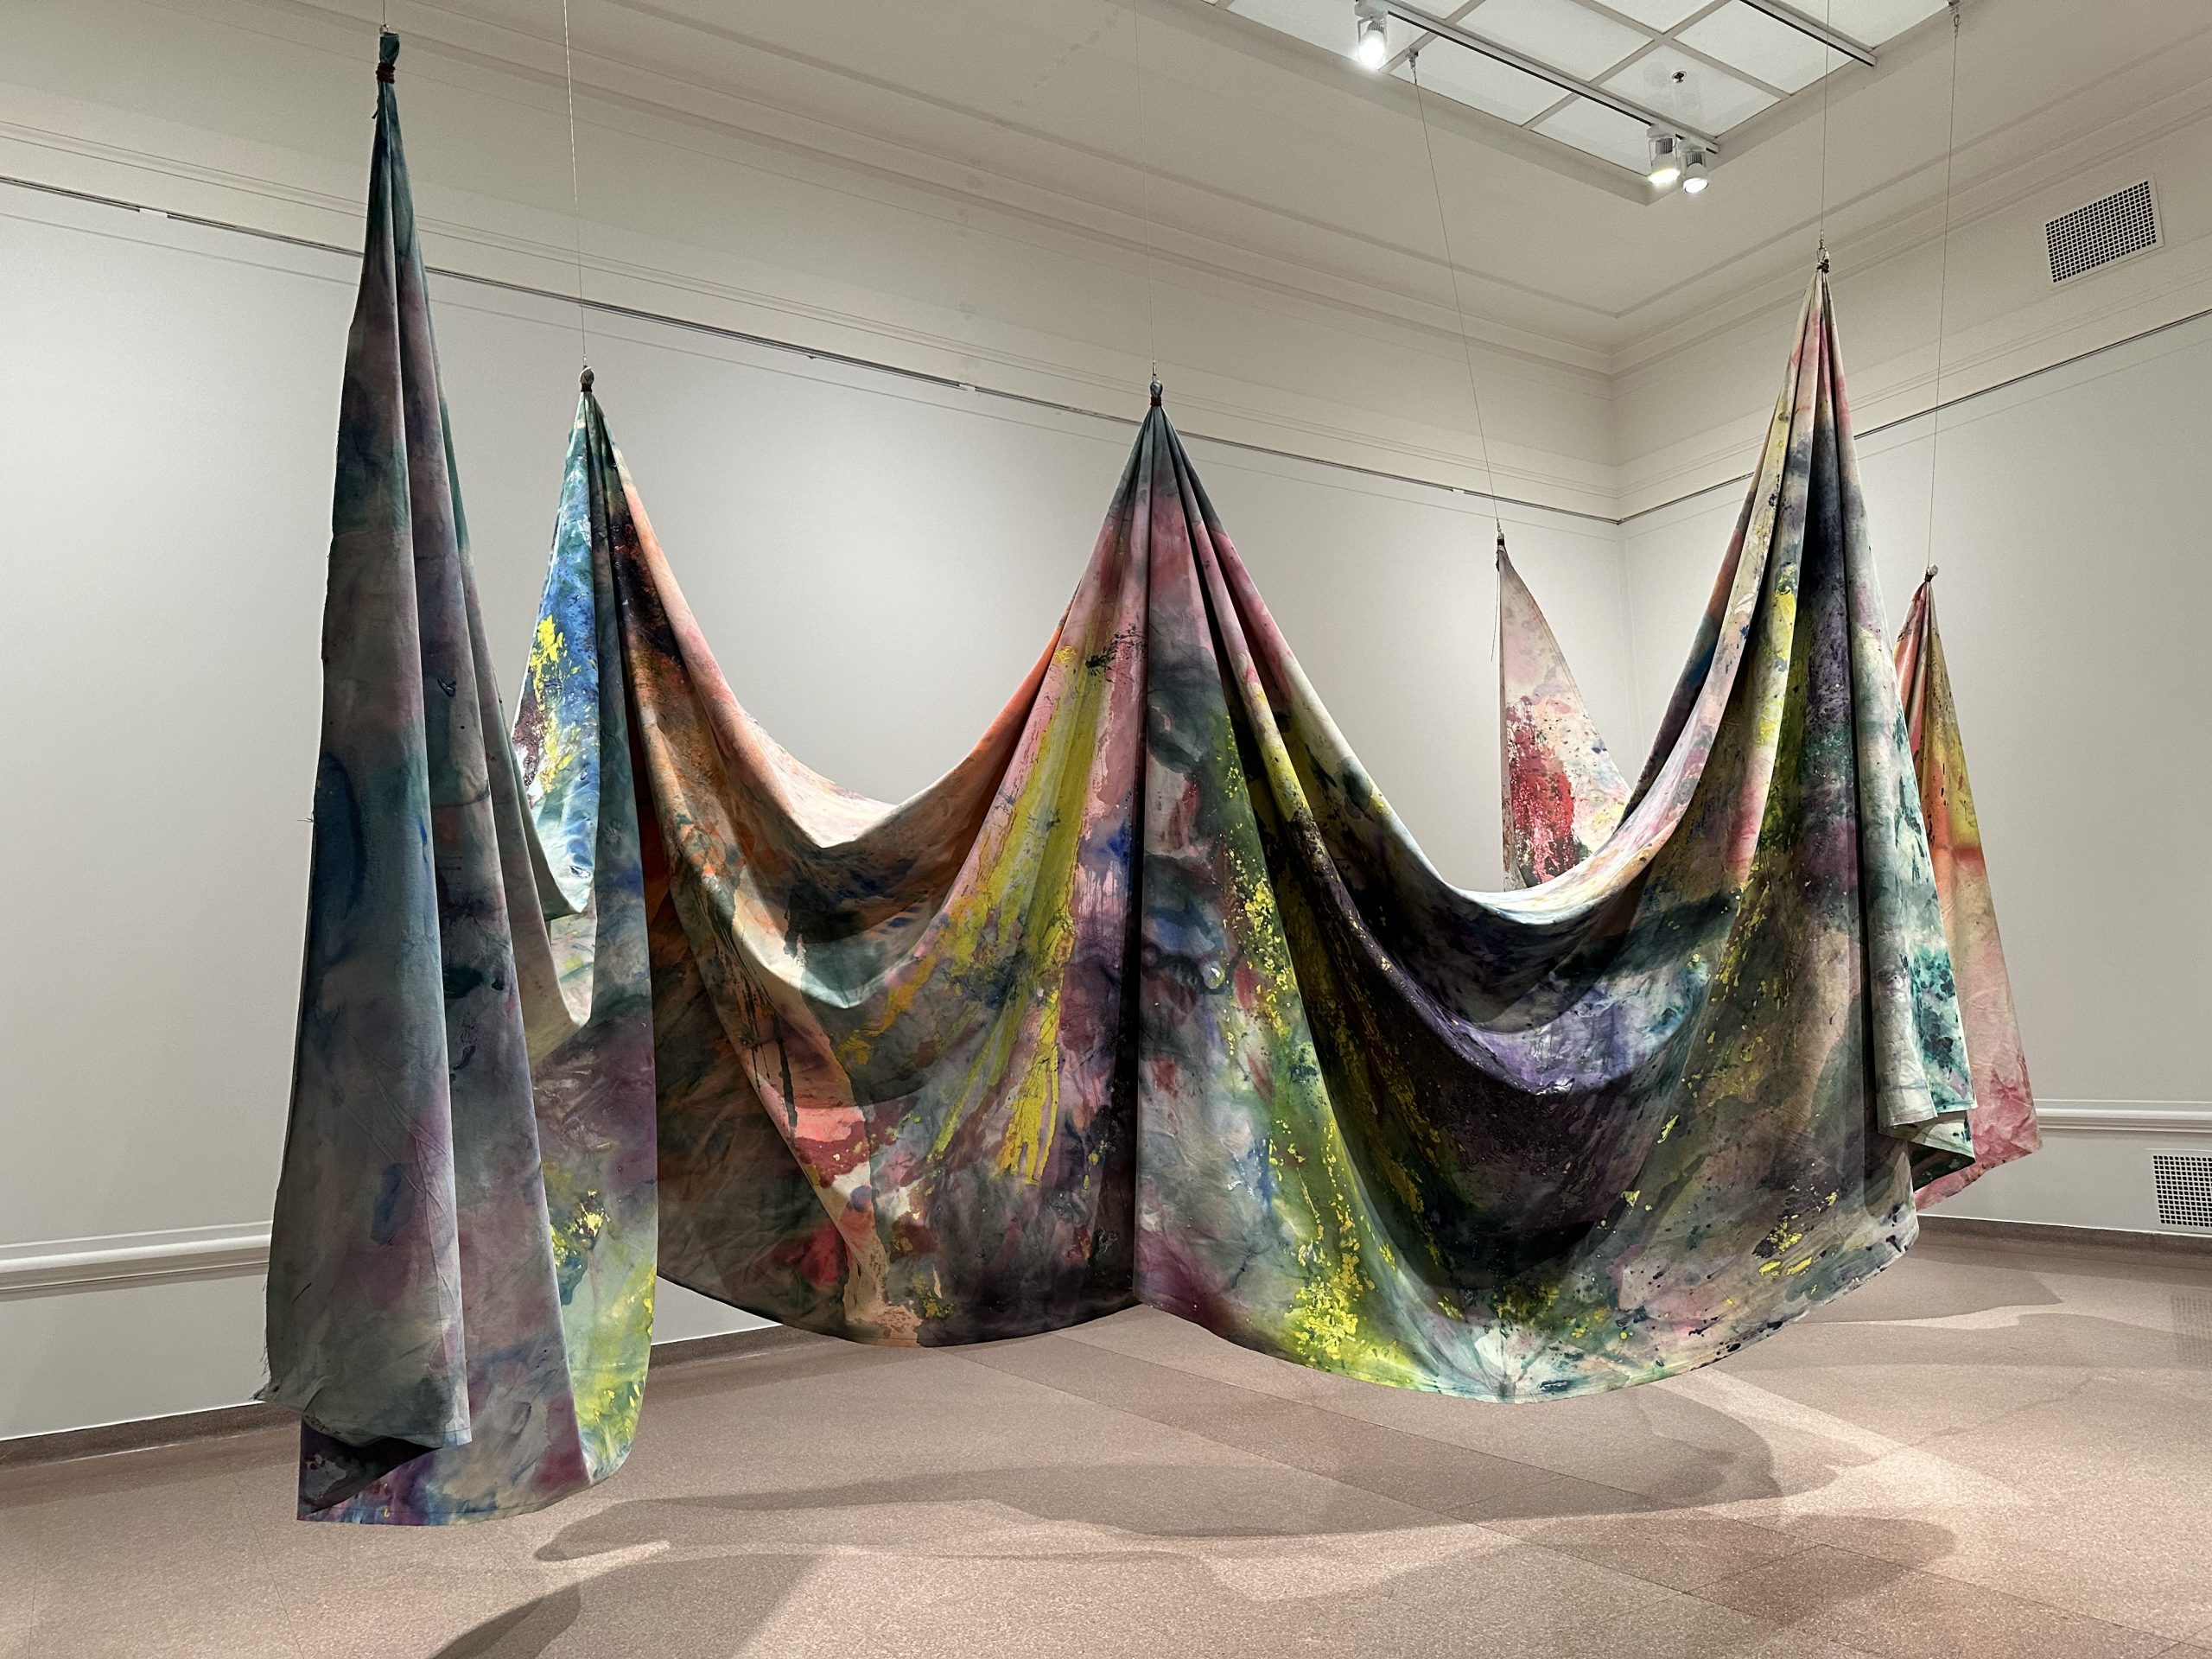 Carousell Form II, 1969, Sam Gilliam; Portrait of Breonna Taylor, 2020, Amy Sherald; and Kentucky sugar chests at the Speed Art Museum in Louisville, Kentucky